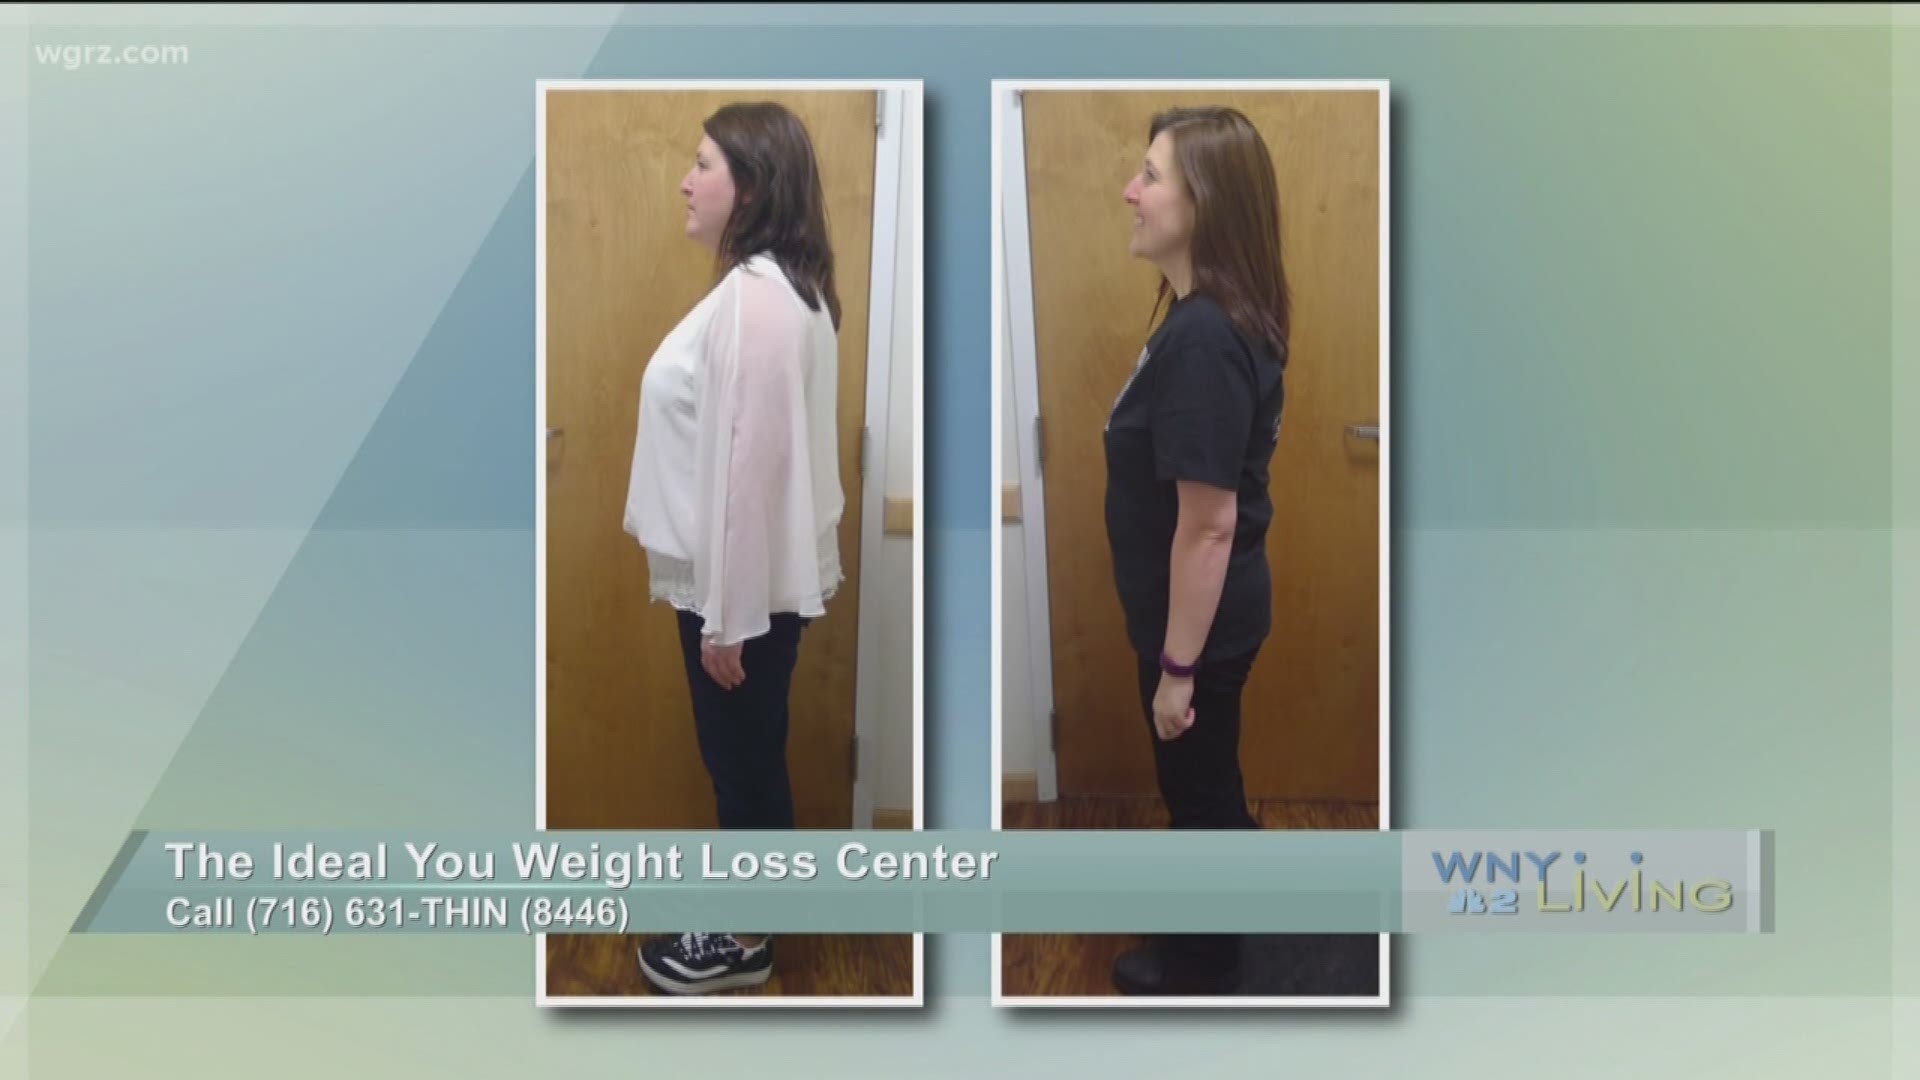 WNY Living - May 25 - The Ideal You Weight Loss Center (SPONSORED CONTENT)